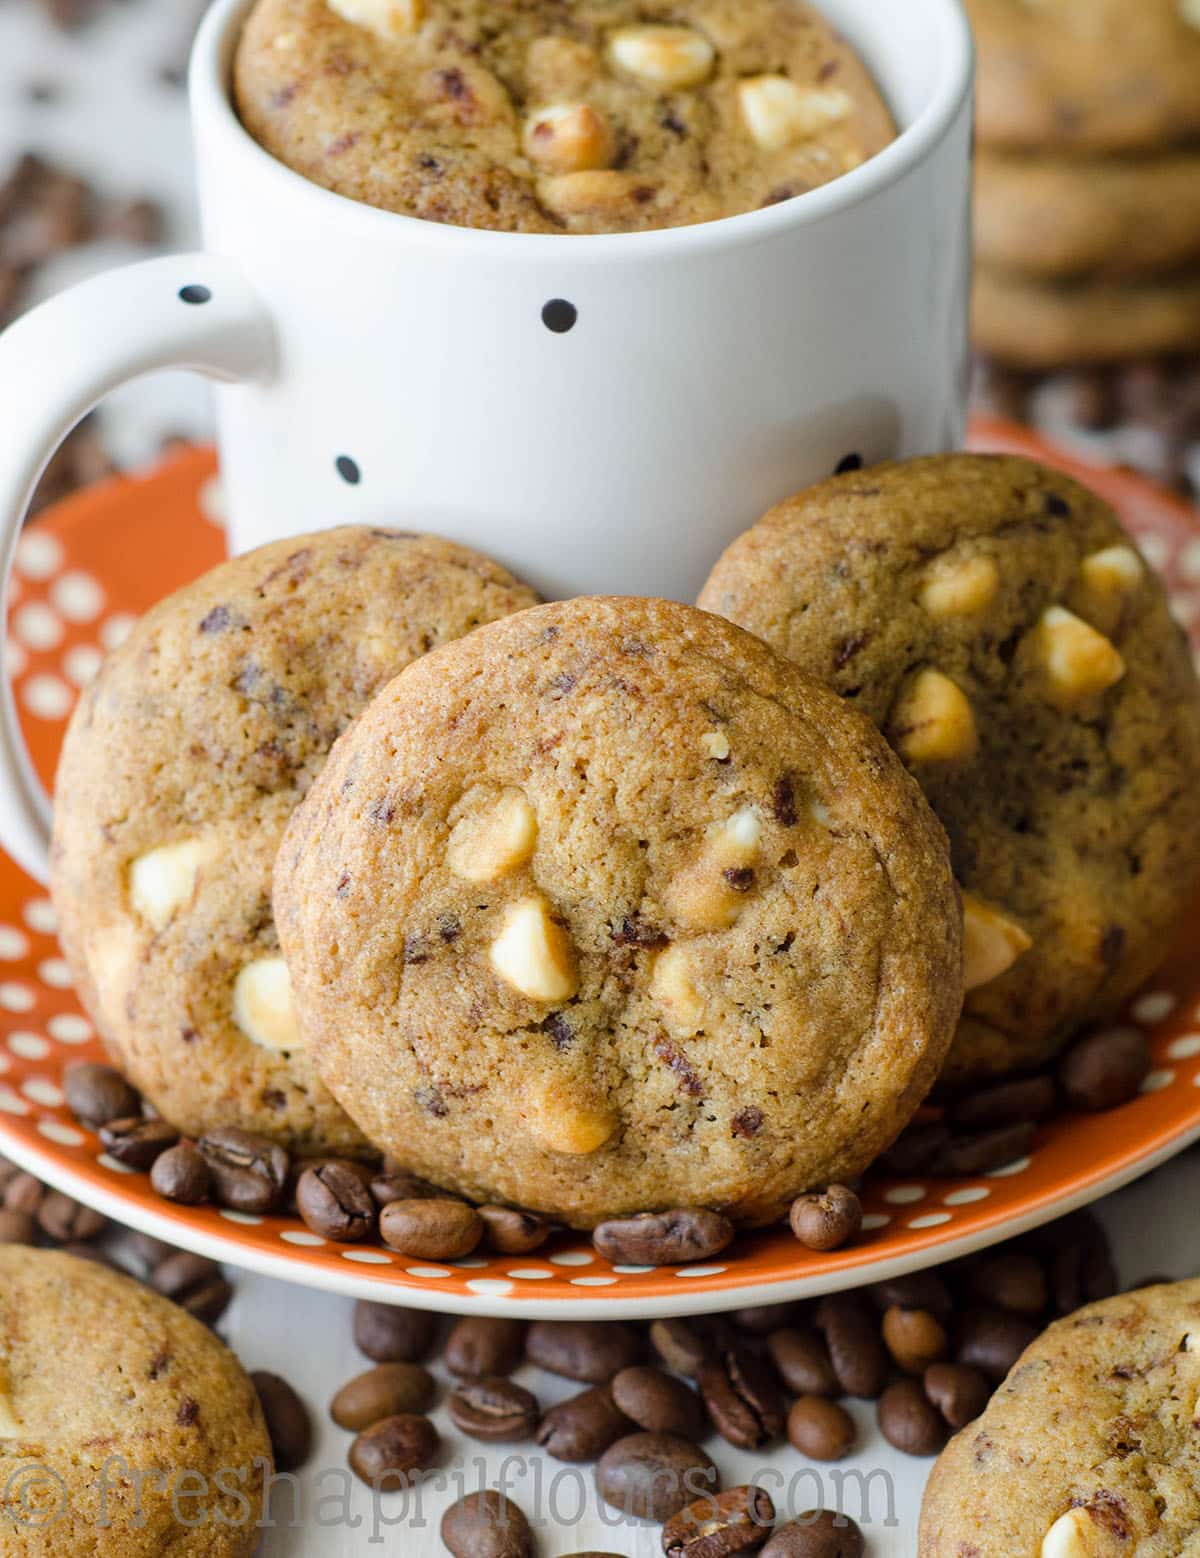 cappuccino cookies on a plate with coffee beans and a mug of coffee